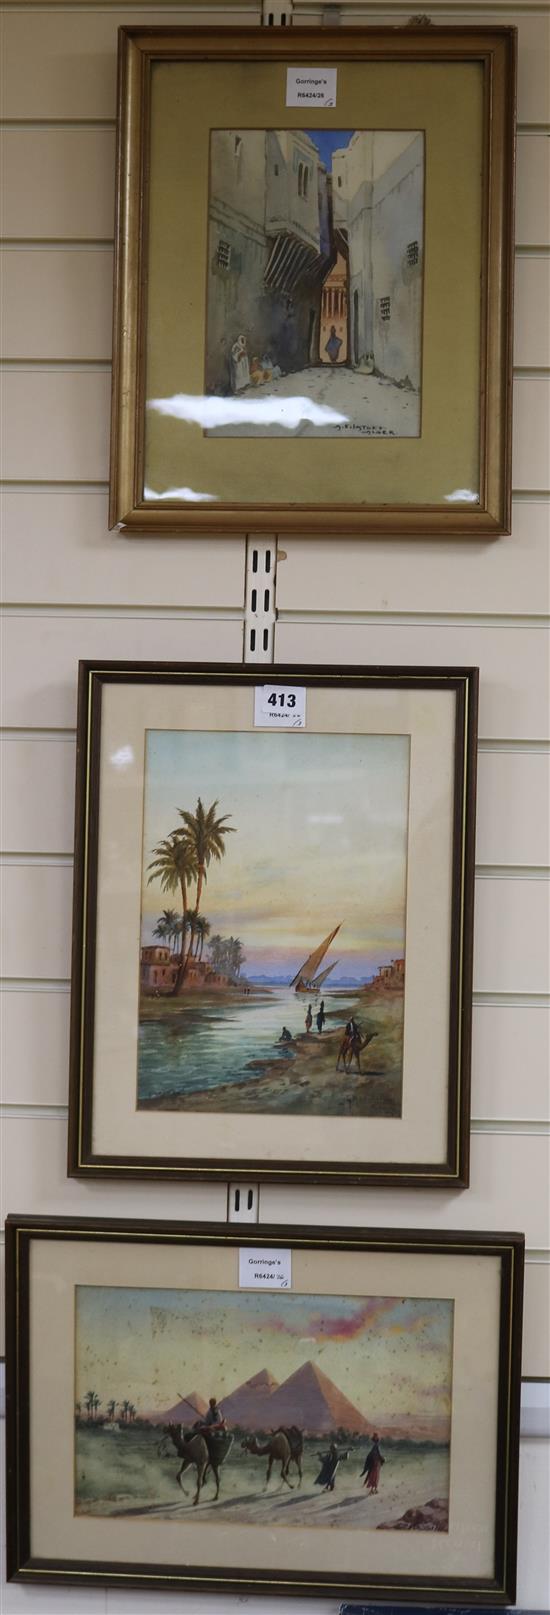 G. Marchettini, watercolour, Arab beside The Nile, signed, 30 x 20cm and two similar watercolours